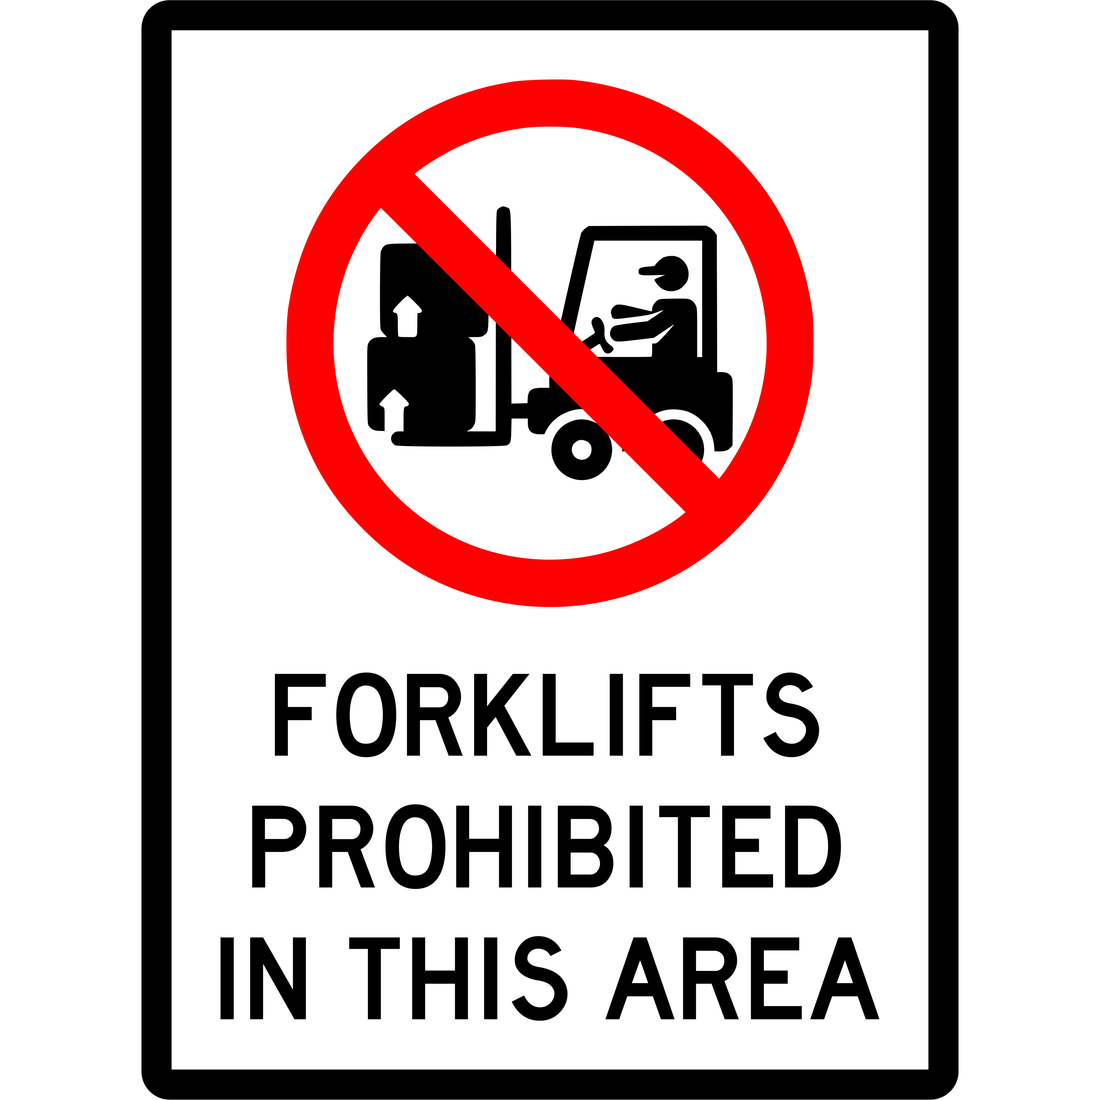 PROHIBITION - FORKLIFTS PROHIBITED IN THIS AREA